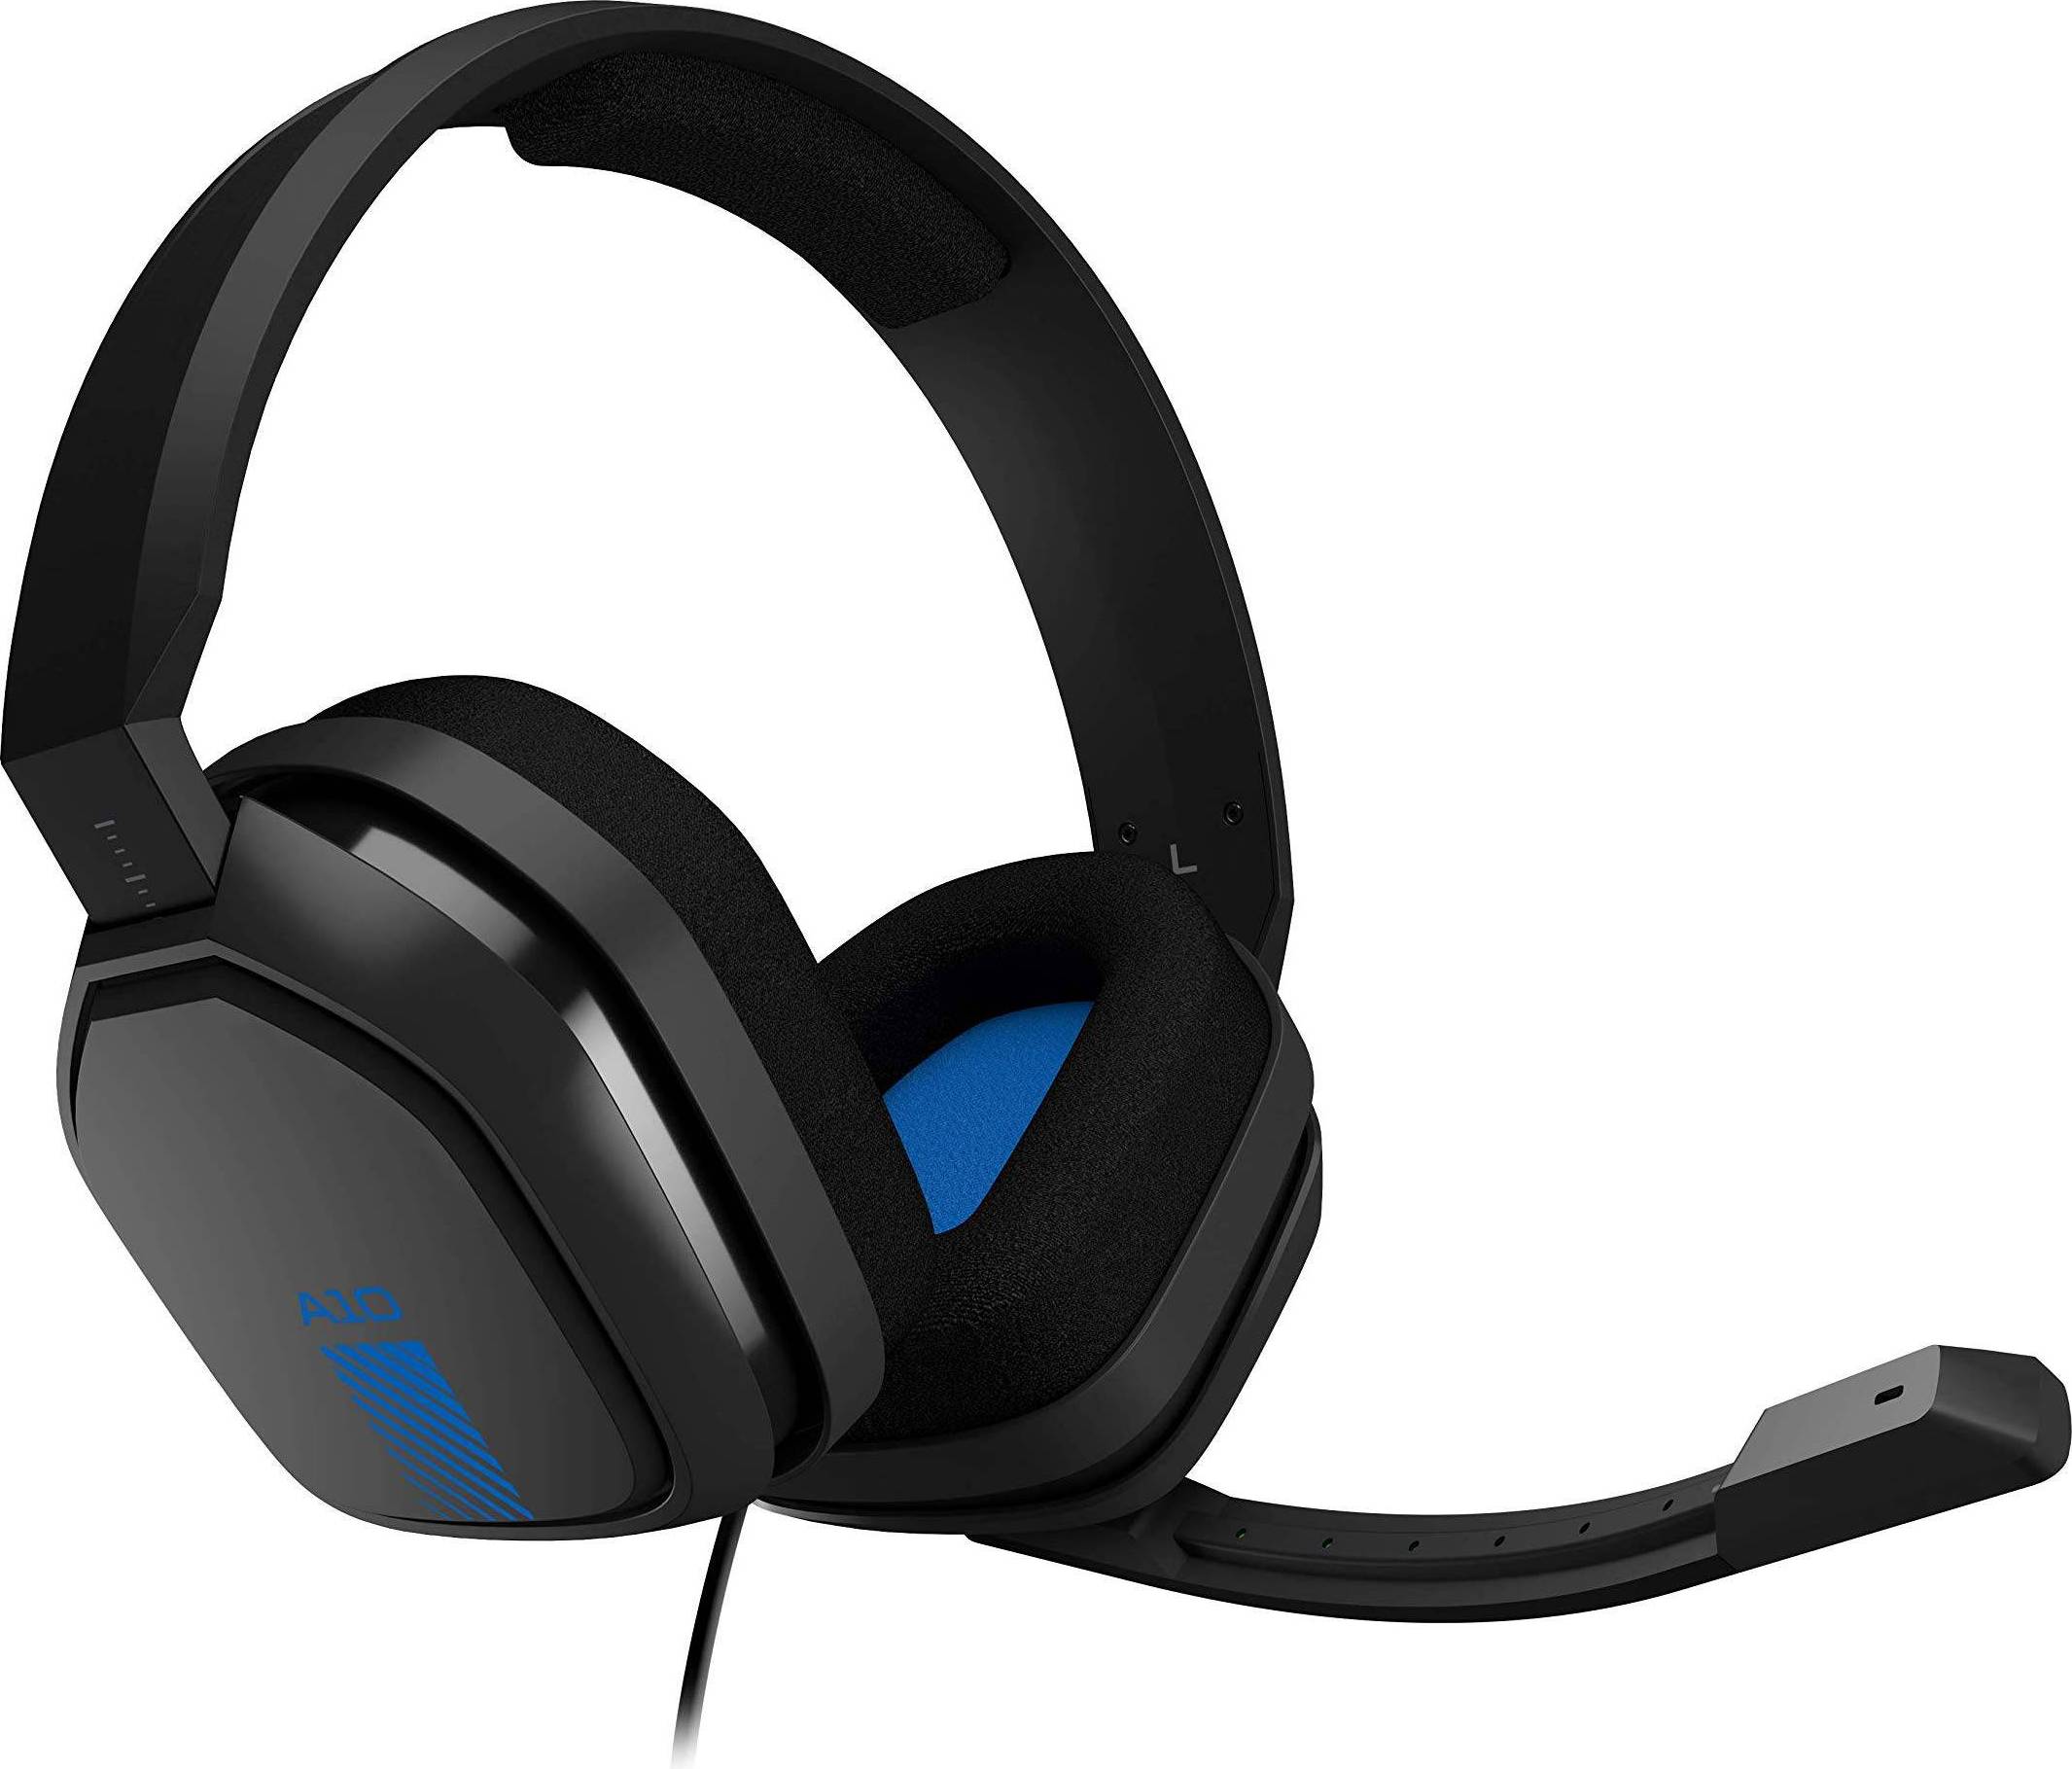  Bild på Astro A10 Xbox One gaming headset